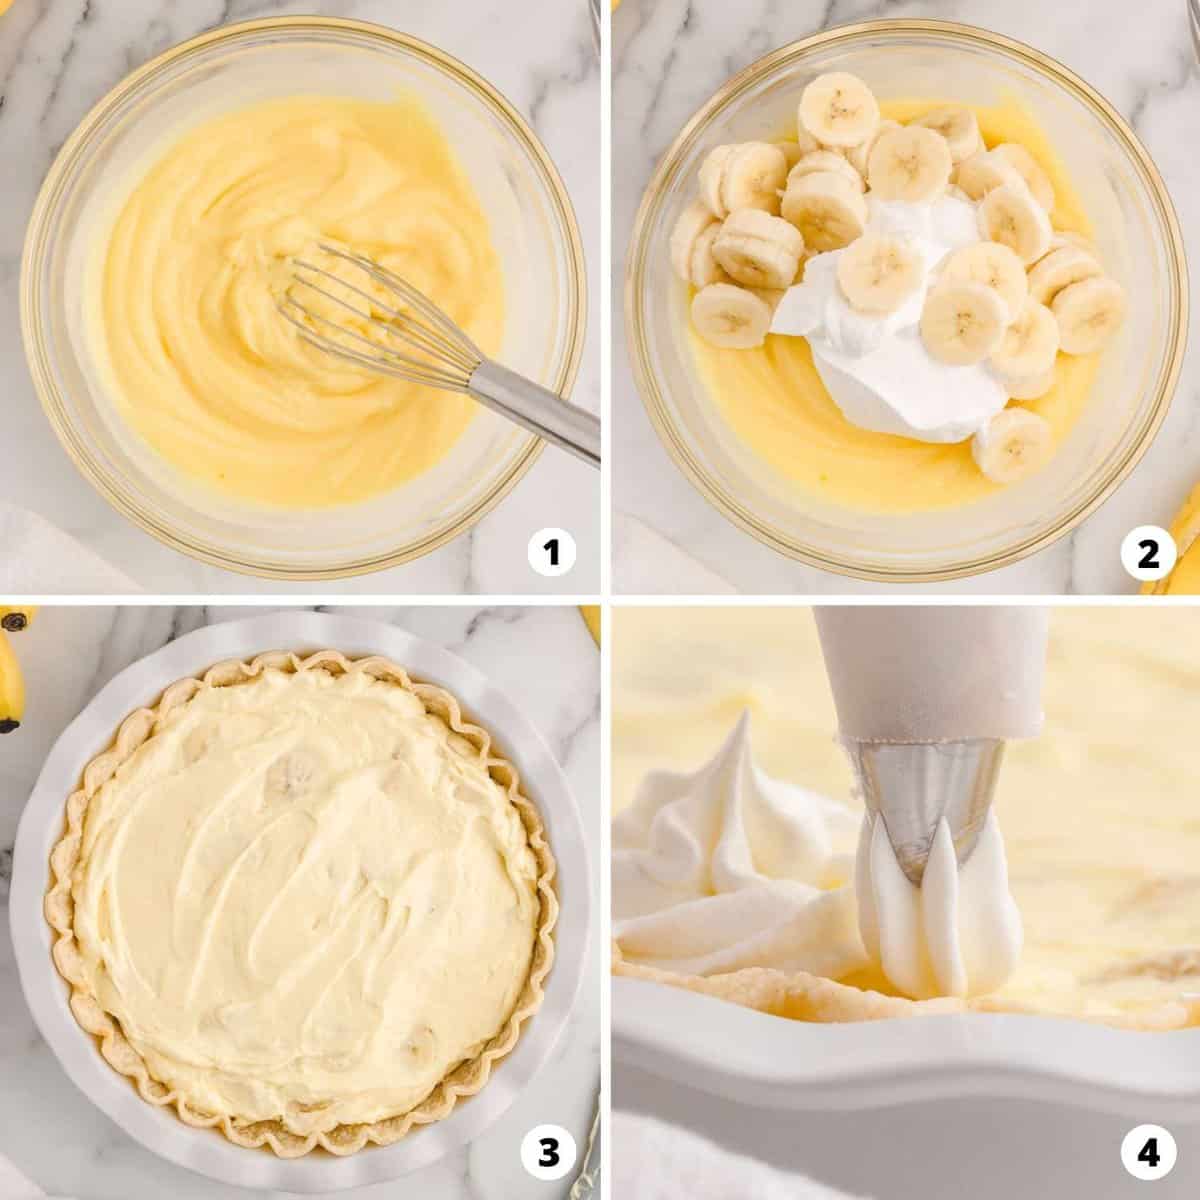 Showing how to make banana cream pie in 4 step collage.